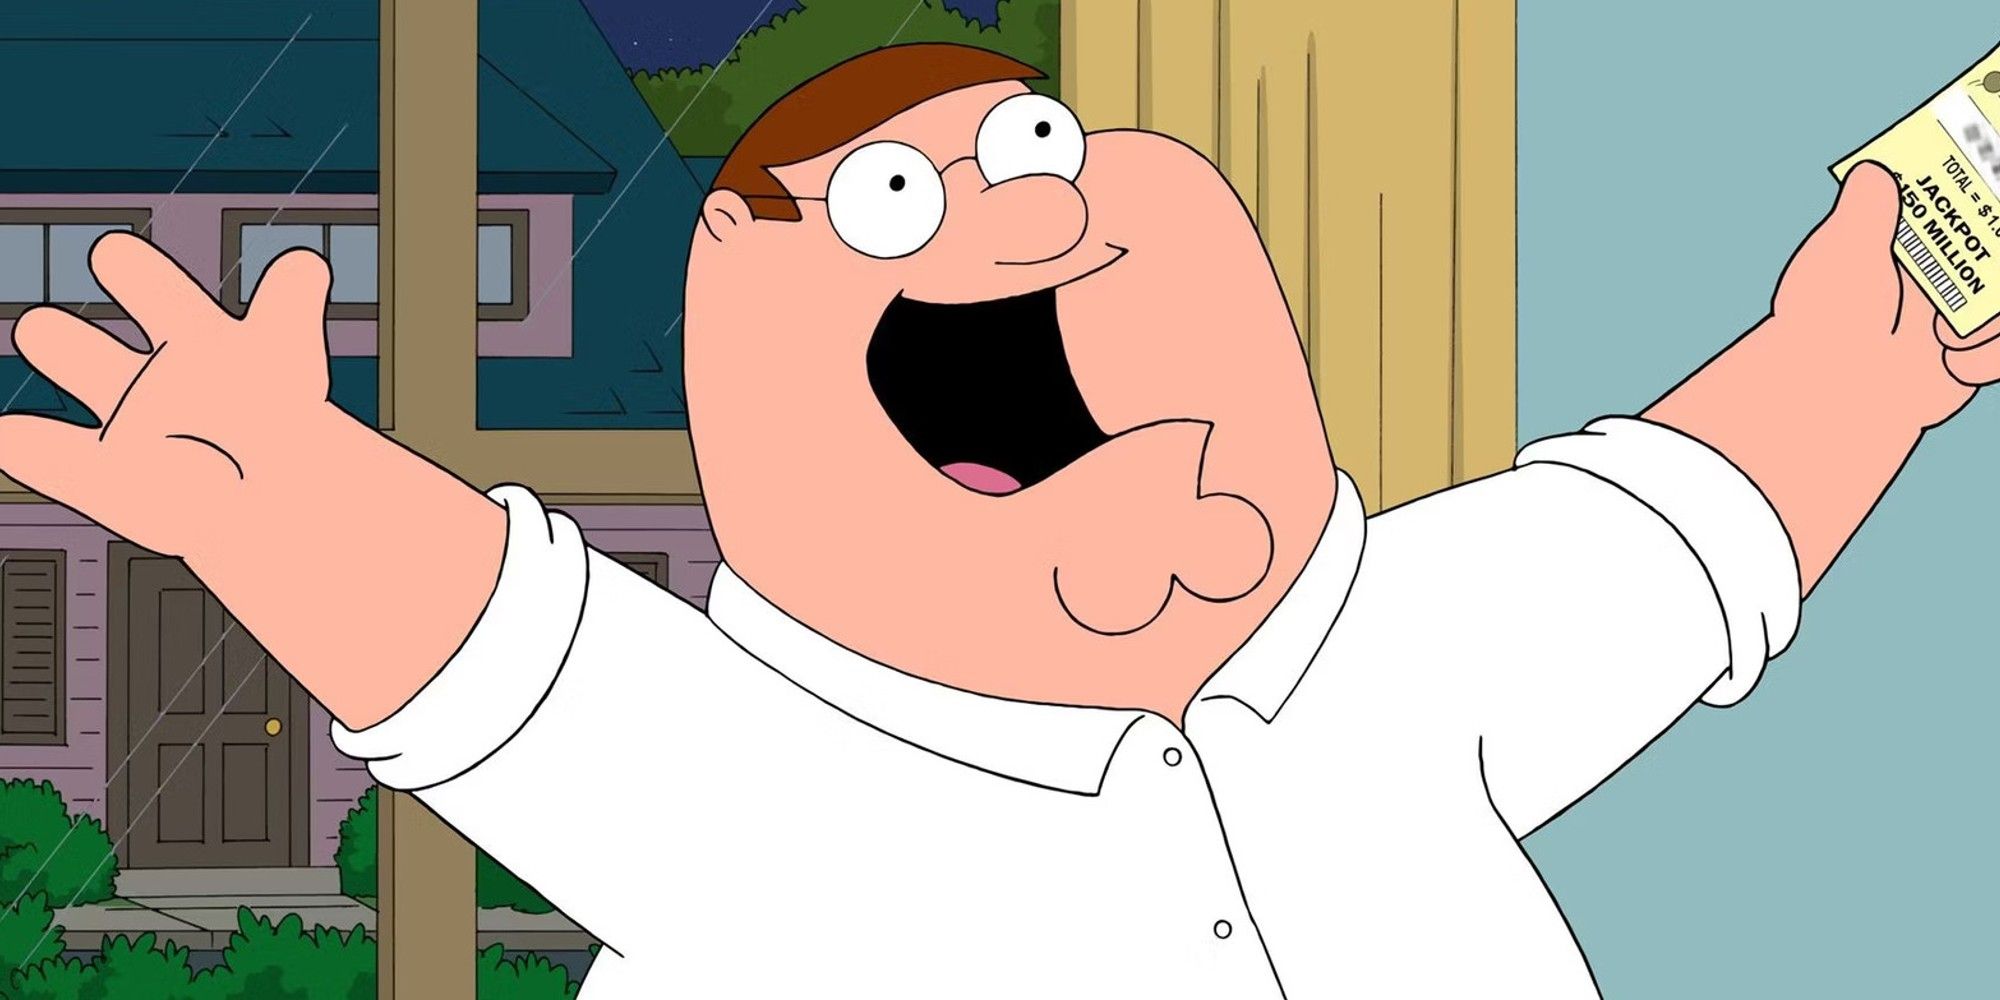 Peter looking super happy while holding onto a paper in Family Guy